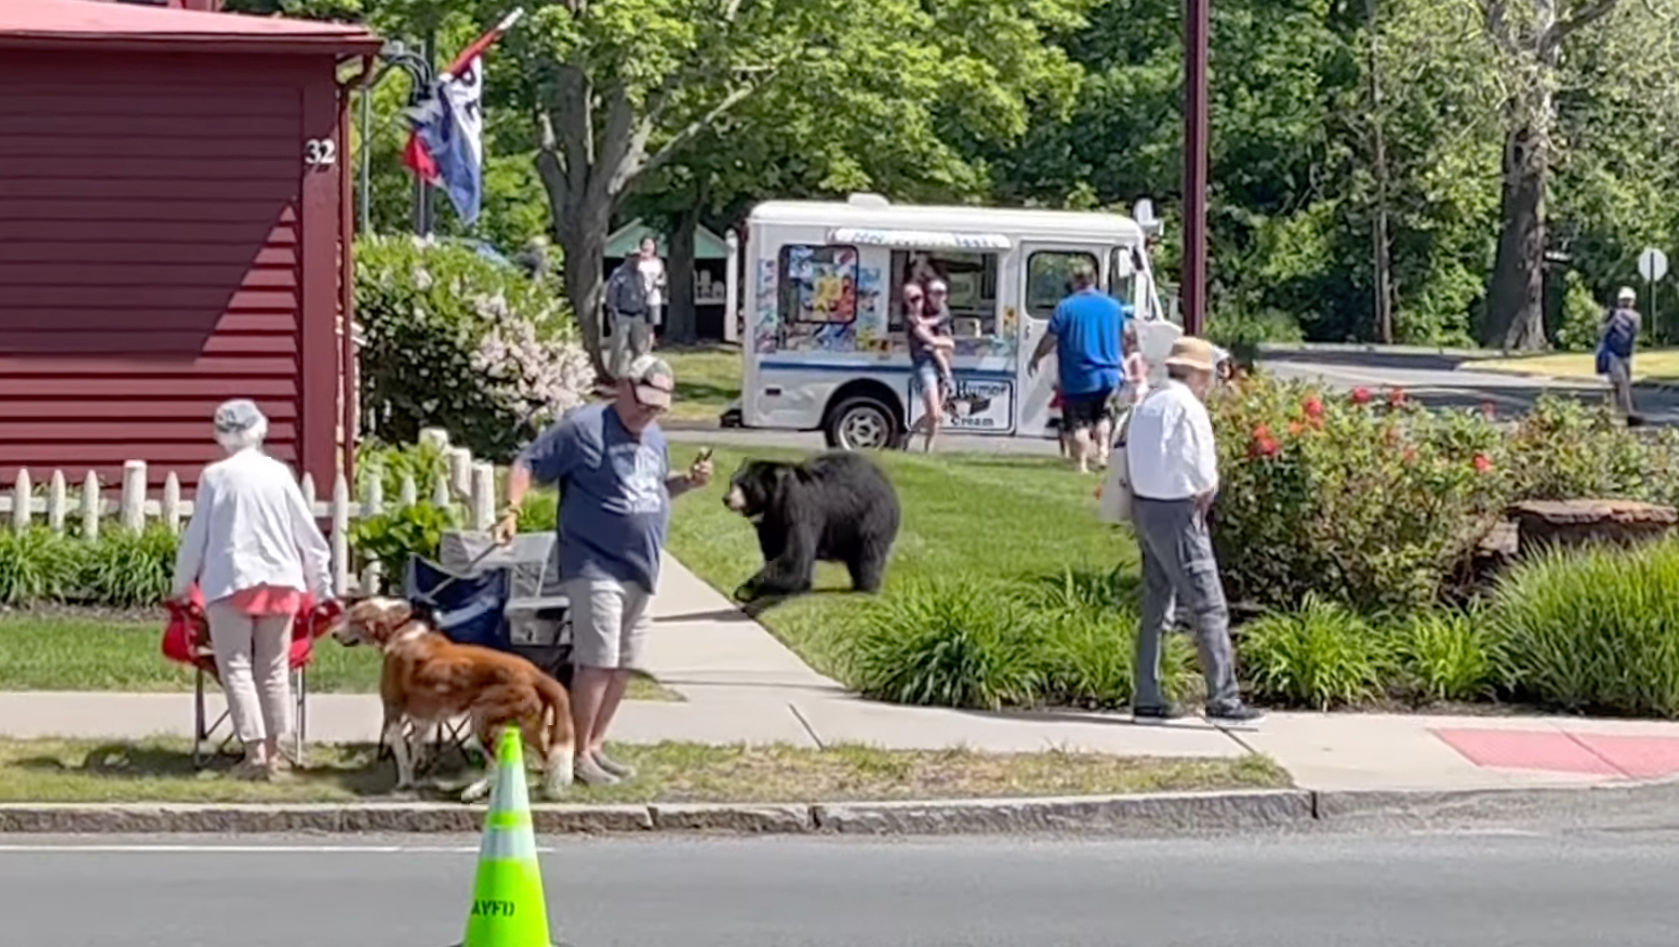 Watch: Connecticut Black Bears Stroll Through Unconcerned Crowds, Steal Cupcakes